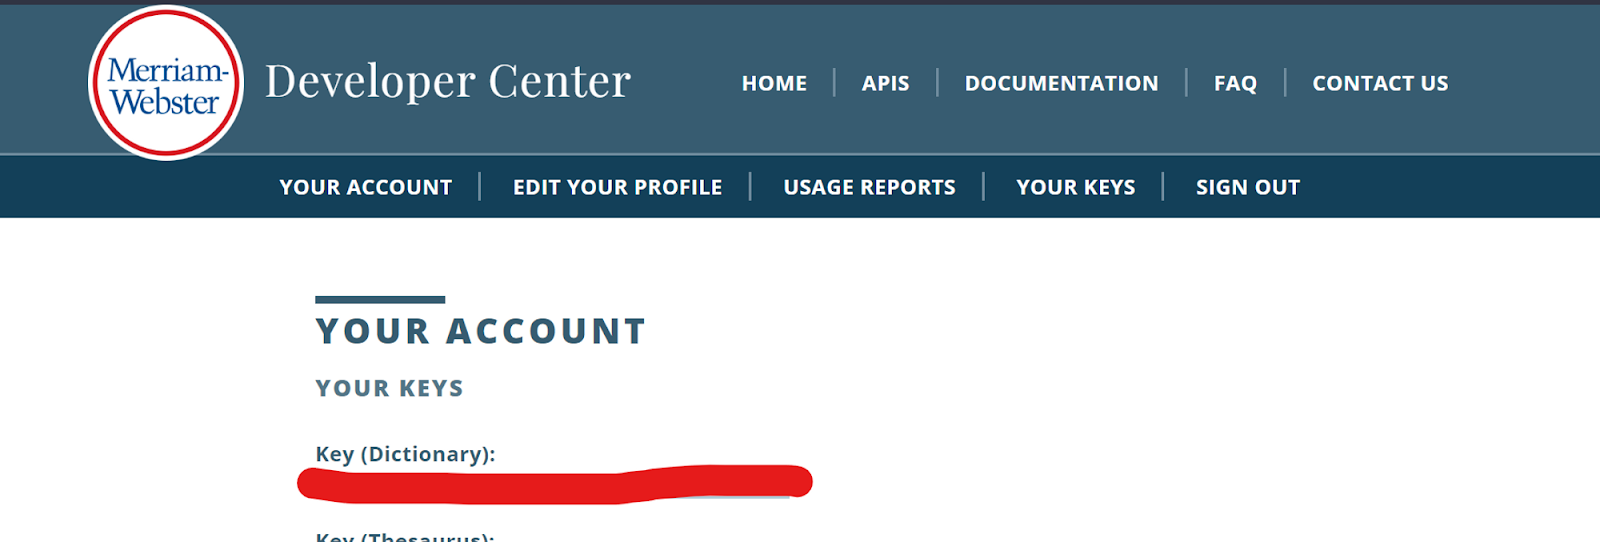 This key tab shows the keys you have registered for 